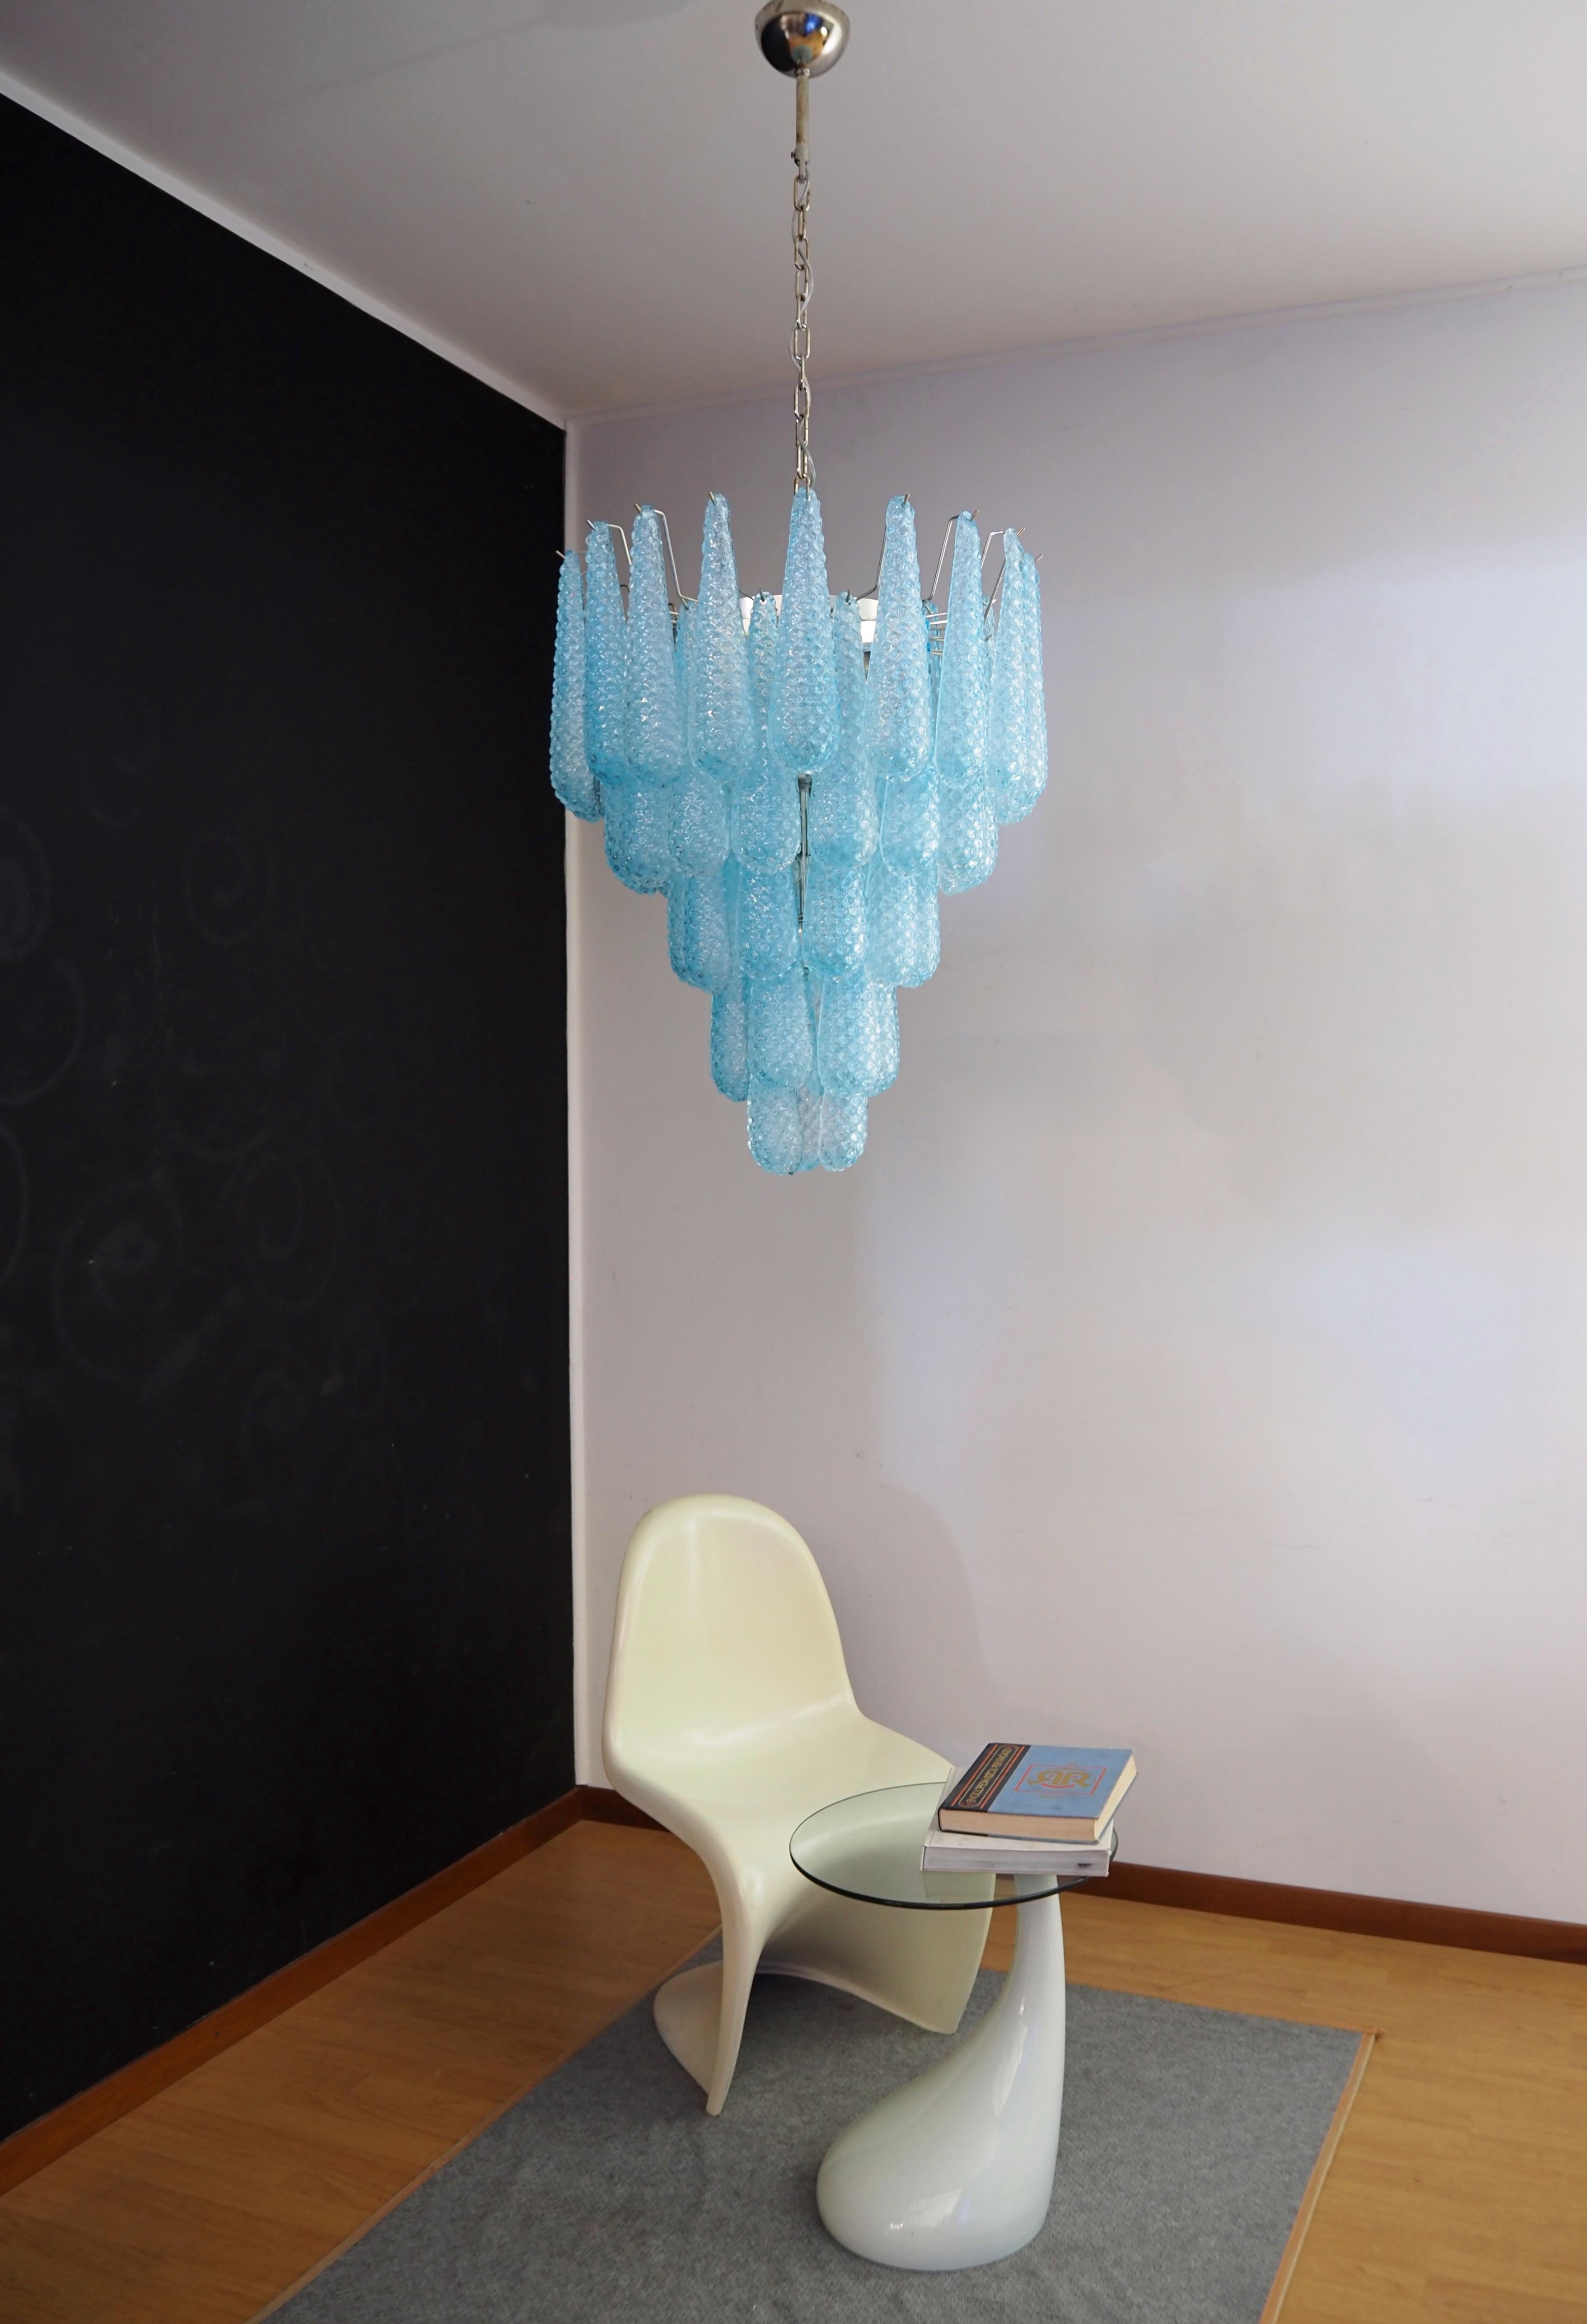 Huge Italian vintage Murano chandelier made by 52 glass petals (BLUE crystal, smooth outside, with crystal powder and then rough inside.) in a chrome frame.
Period:  late XX century
Dimensions:  55,10 inches (140 cm) height with chain; 29,50 inches